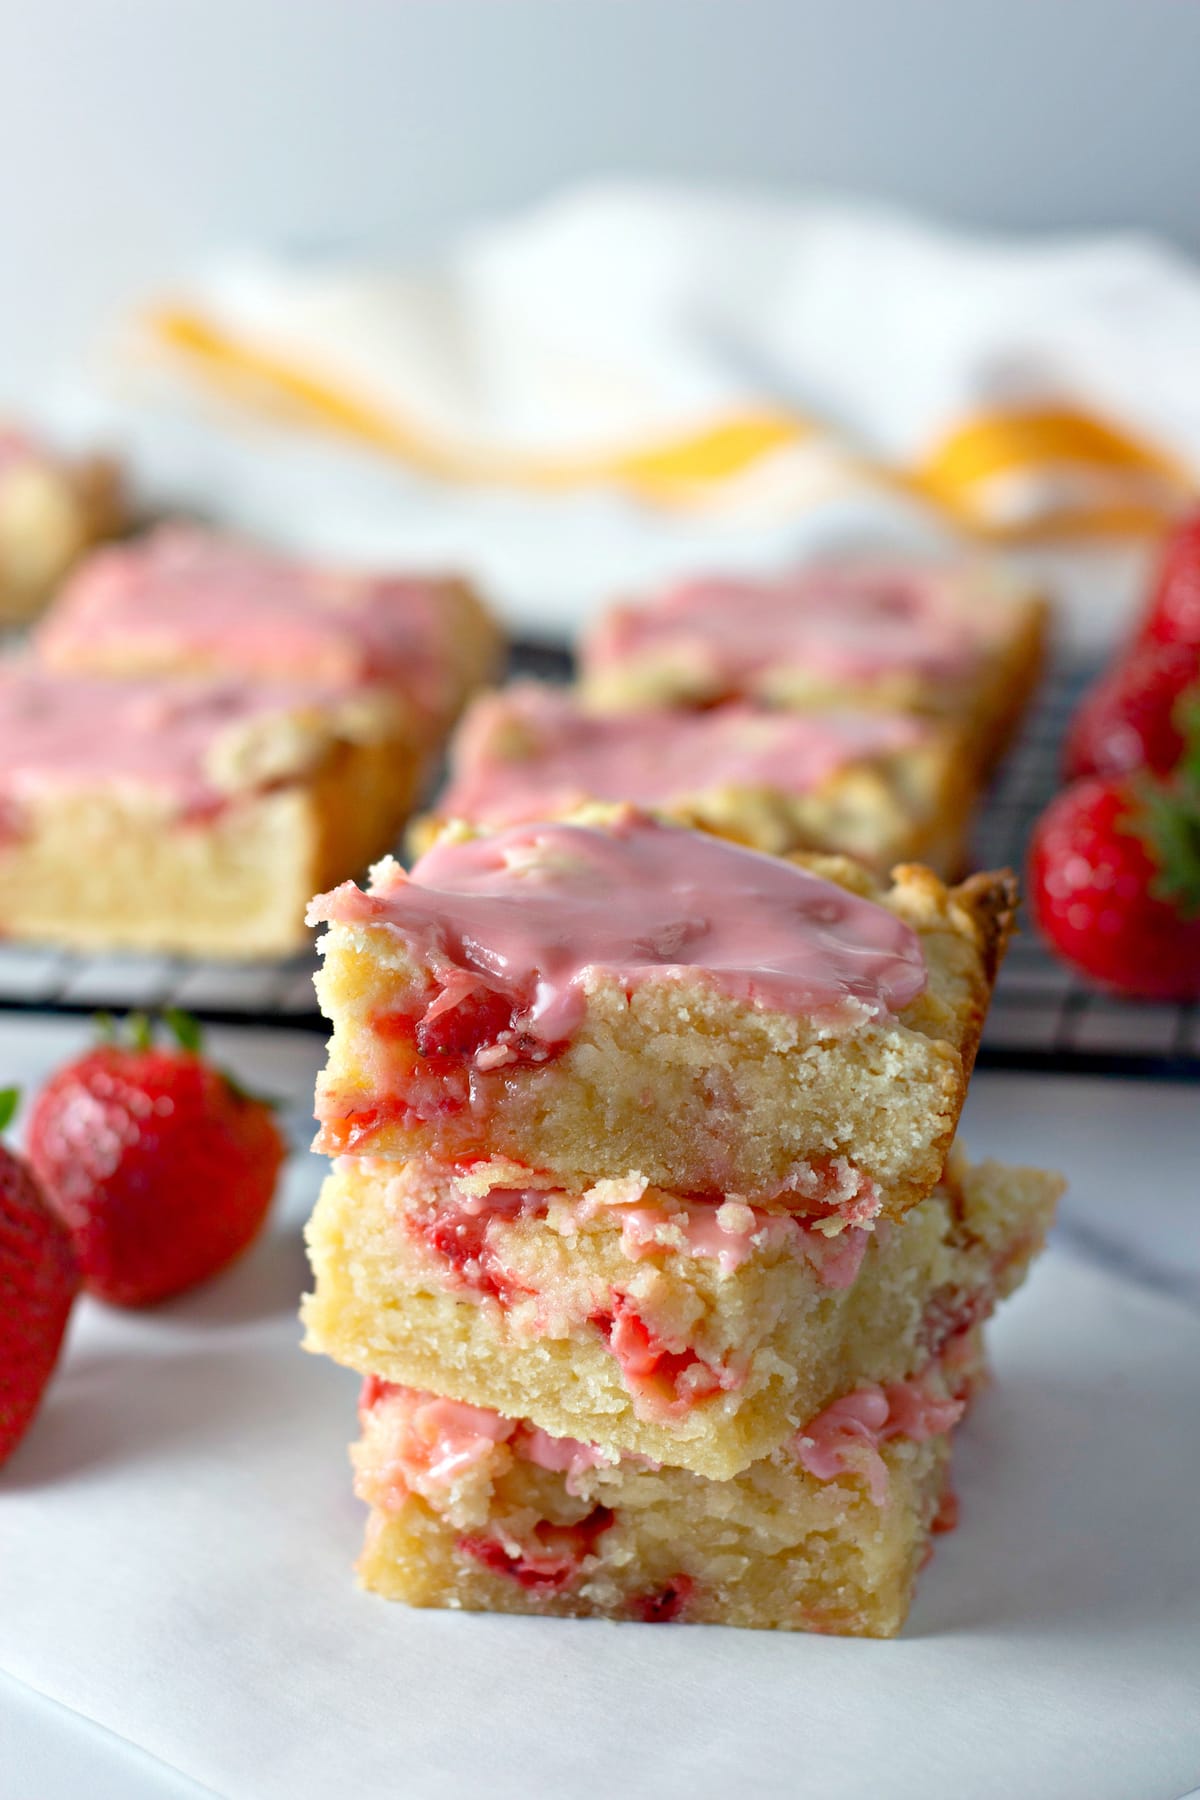 Three strawberry lemon blondies stacked on a countertop next to fresh strawberries, with more blondies in the background.